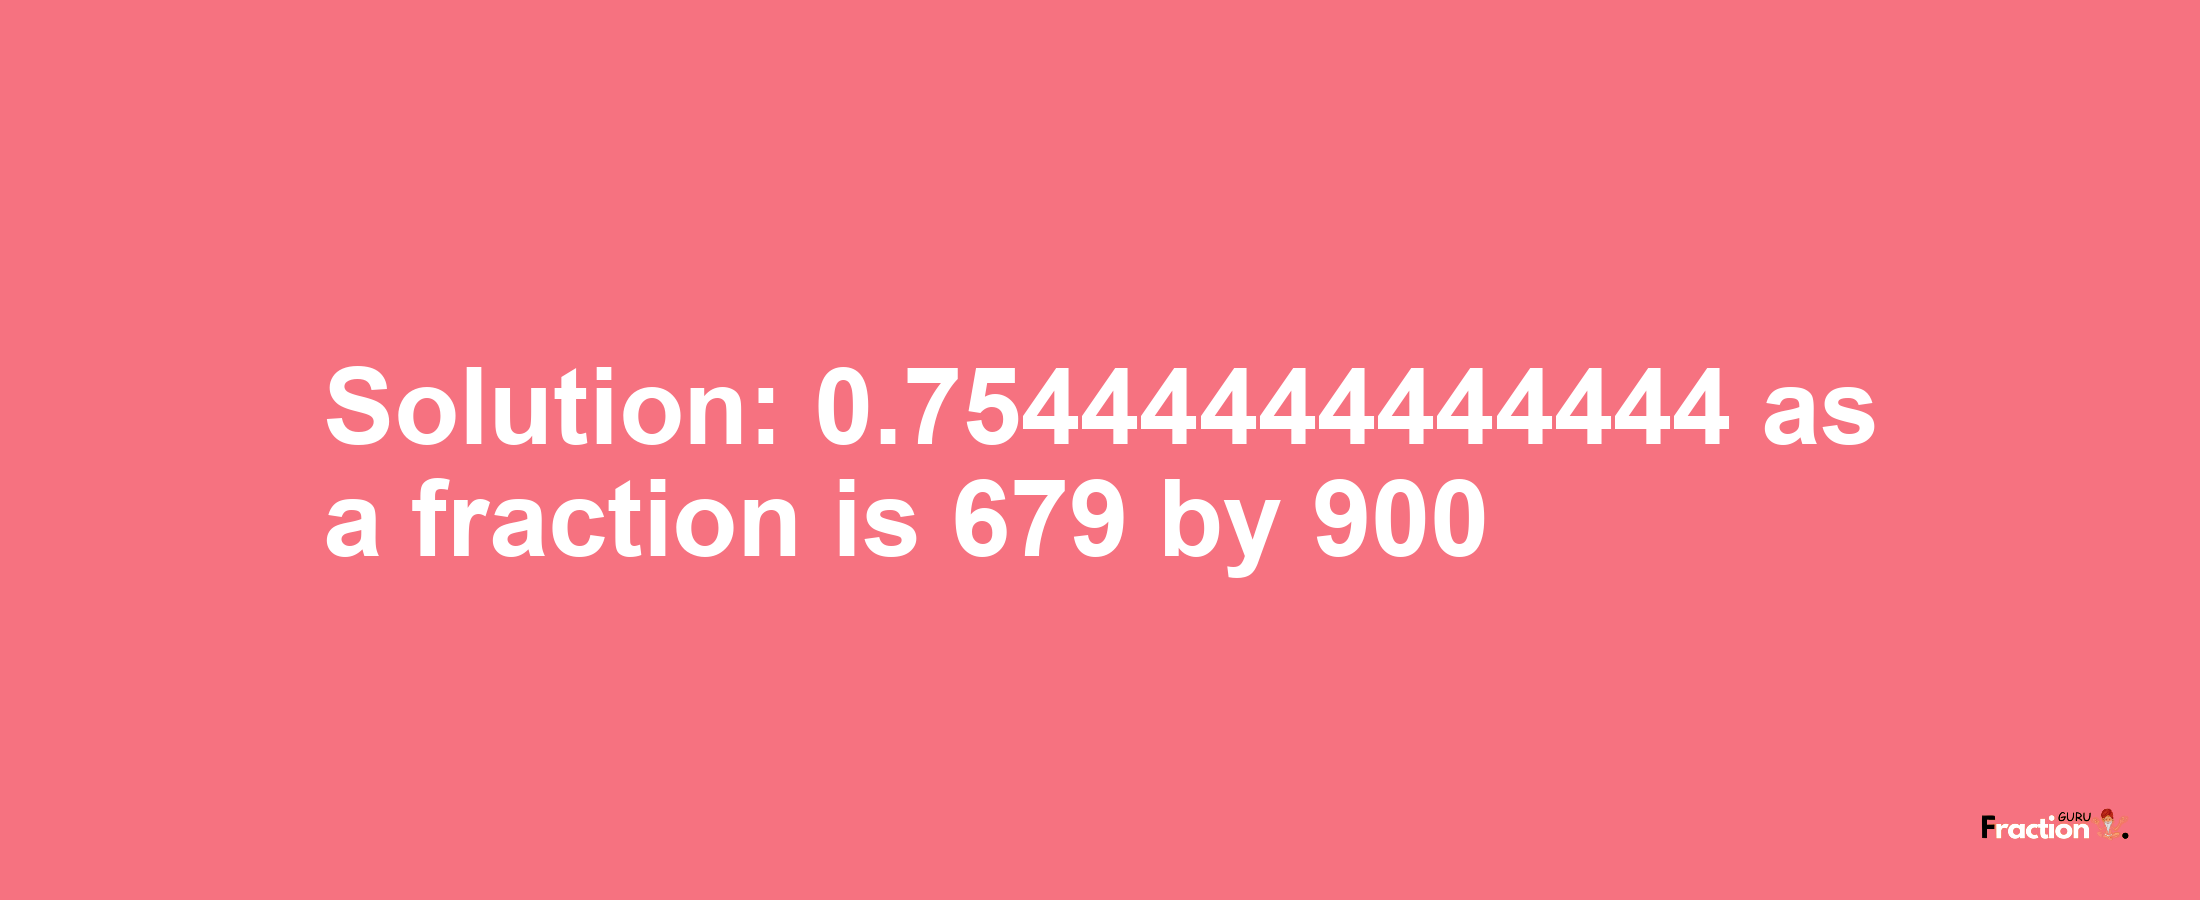 Solution:0.75444444444444 as a fraction is 679/900